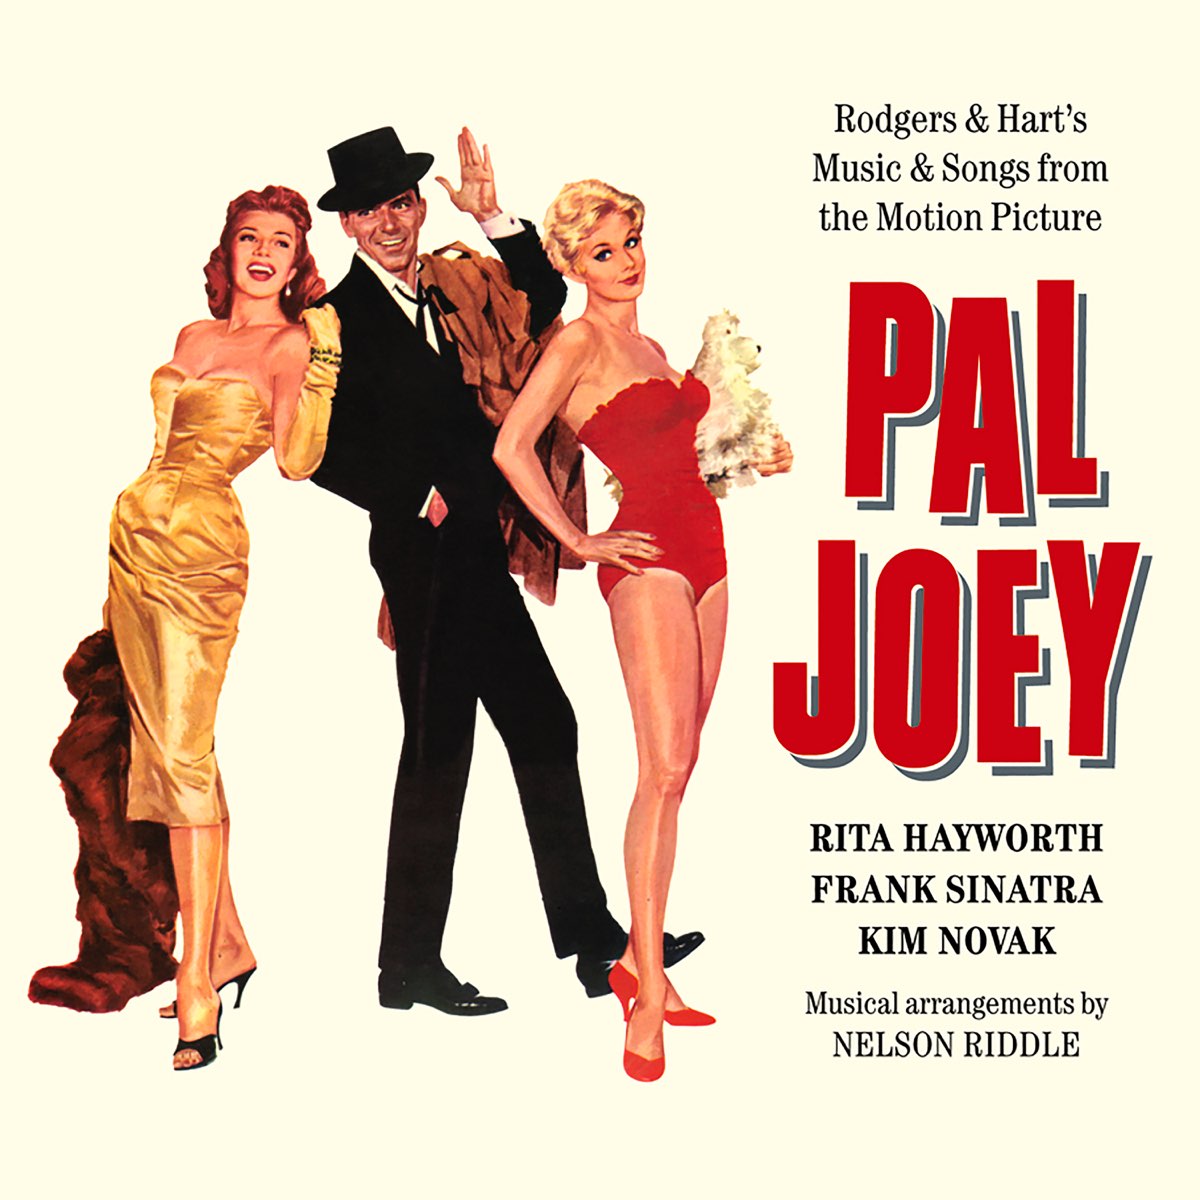 Pal Joey - 1957 Motion Picture - Rodgers & Hammerstein